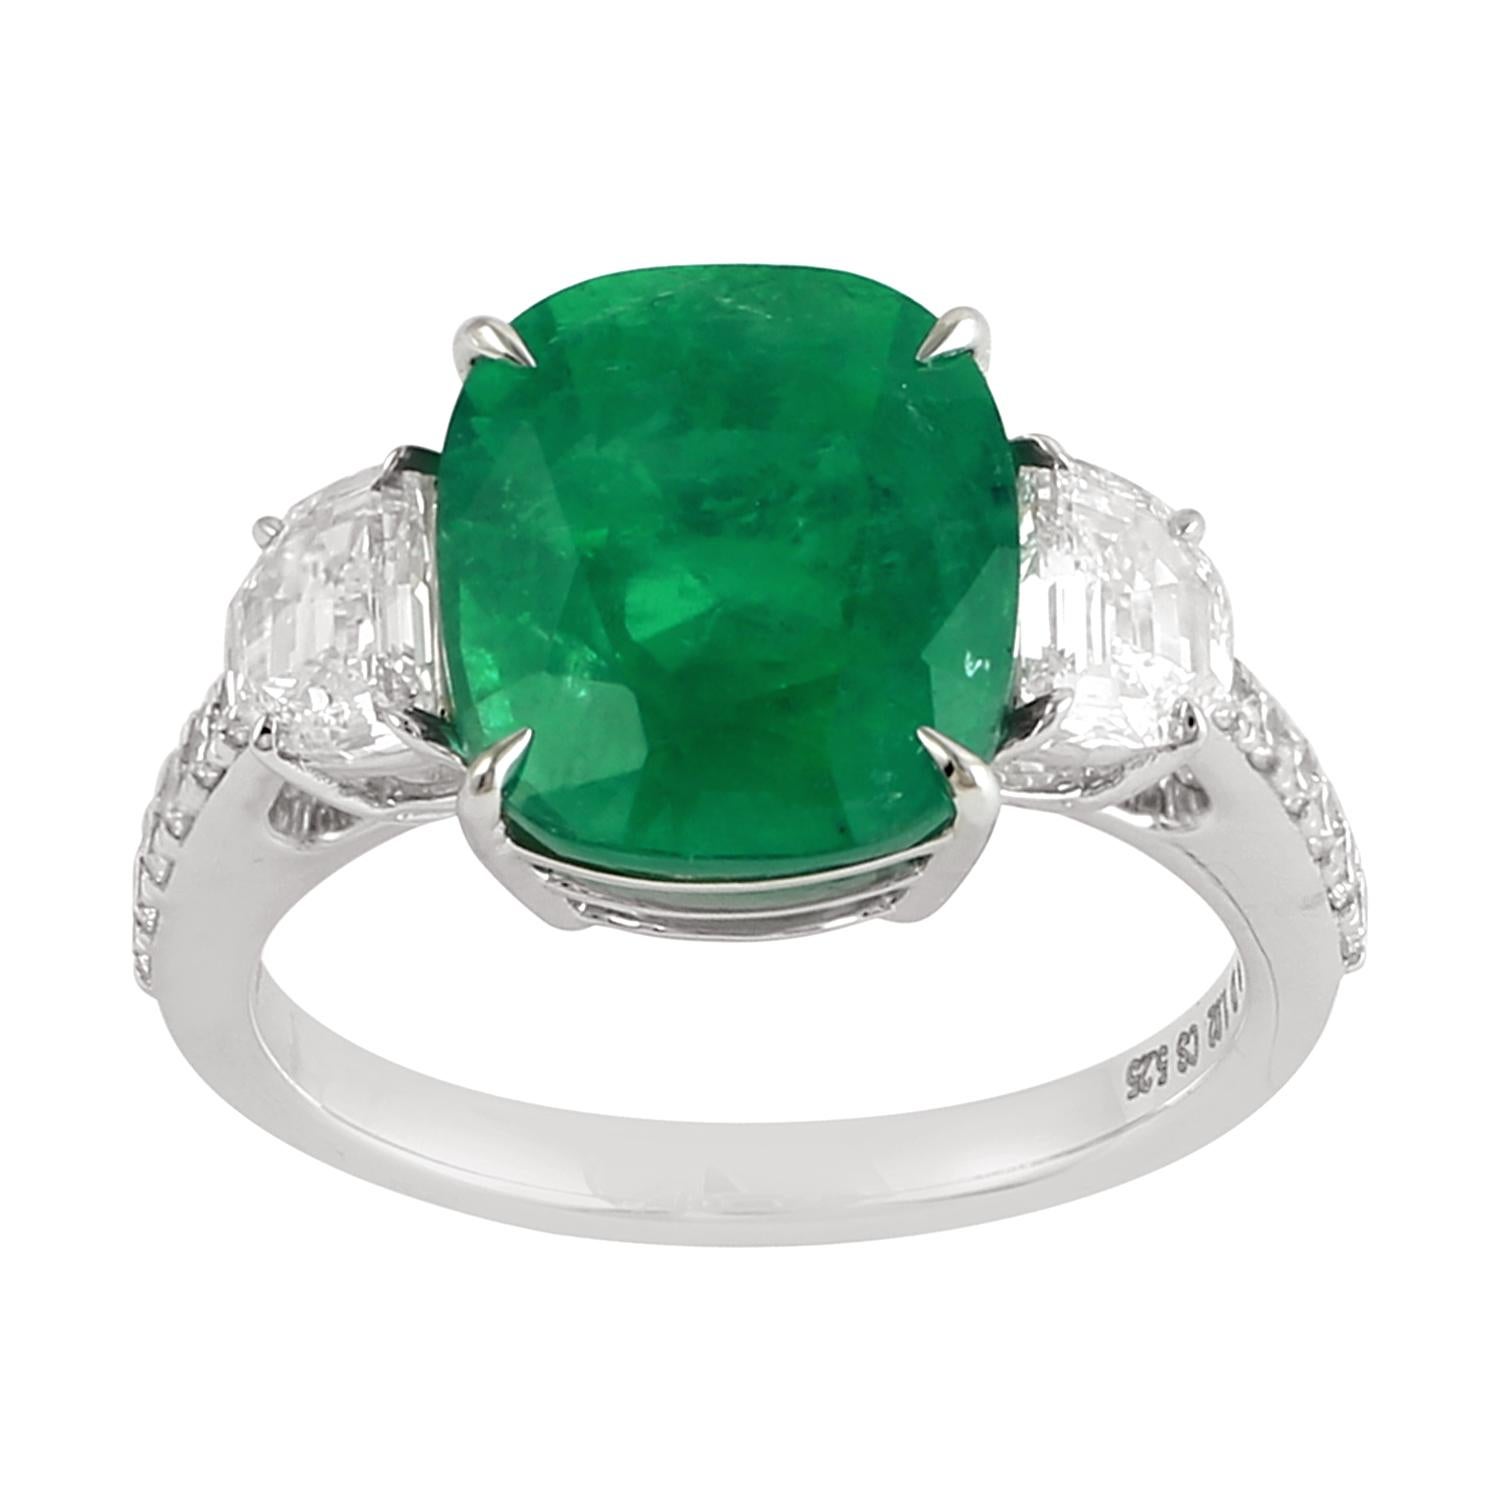 Women's Cushion Shaped Zambian Emerald Cocktail Ring With Diamonds For Sale